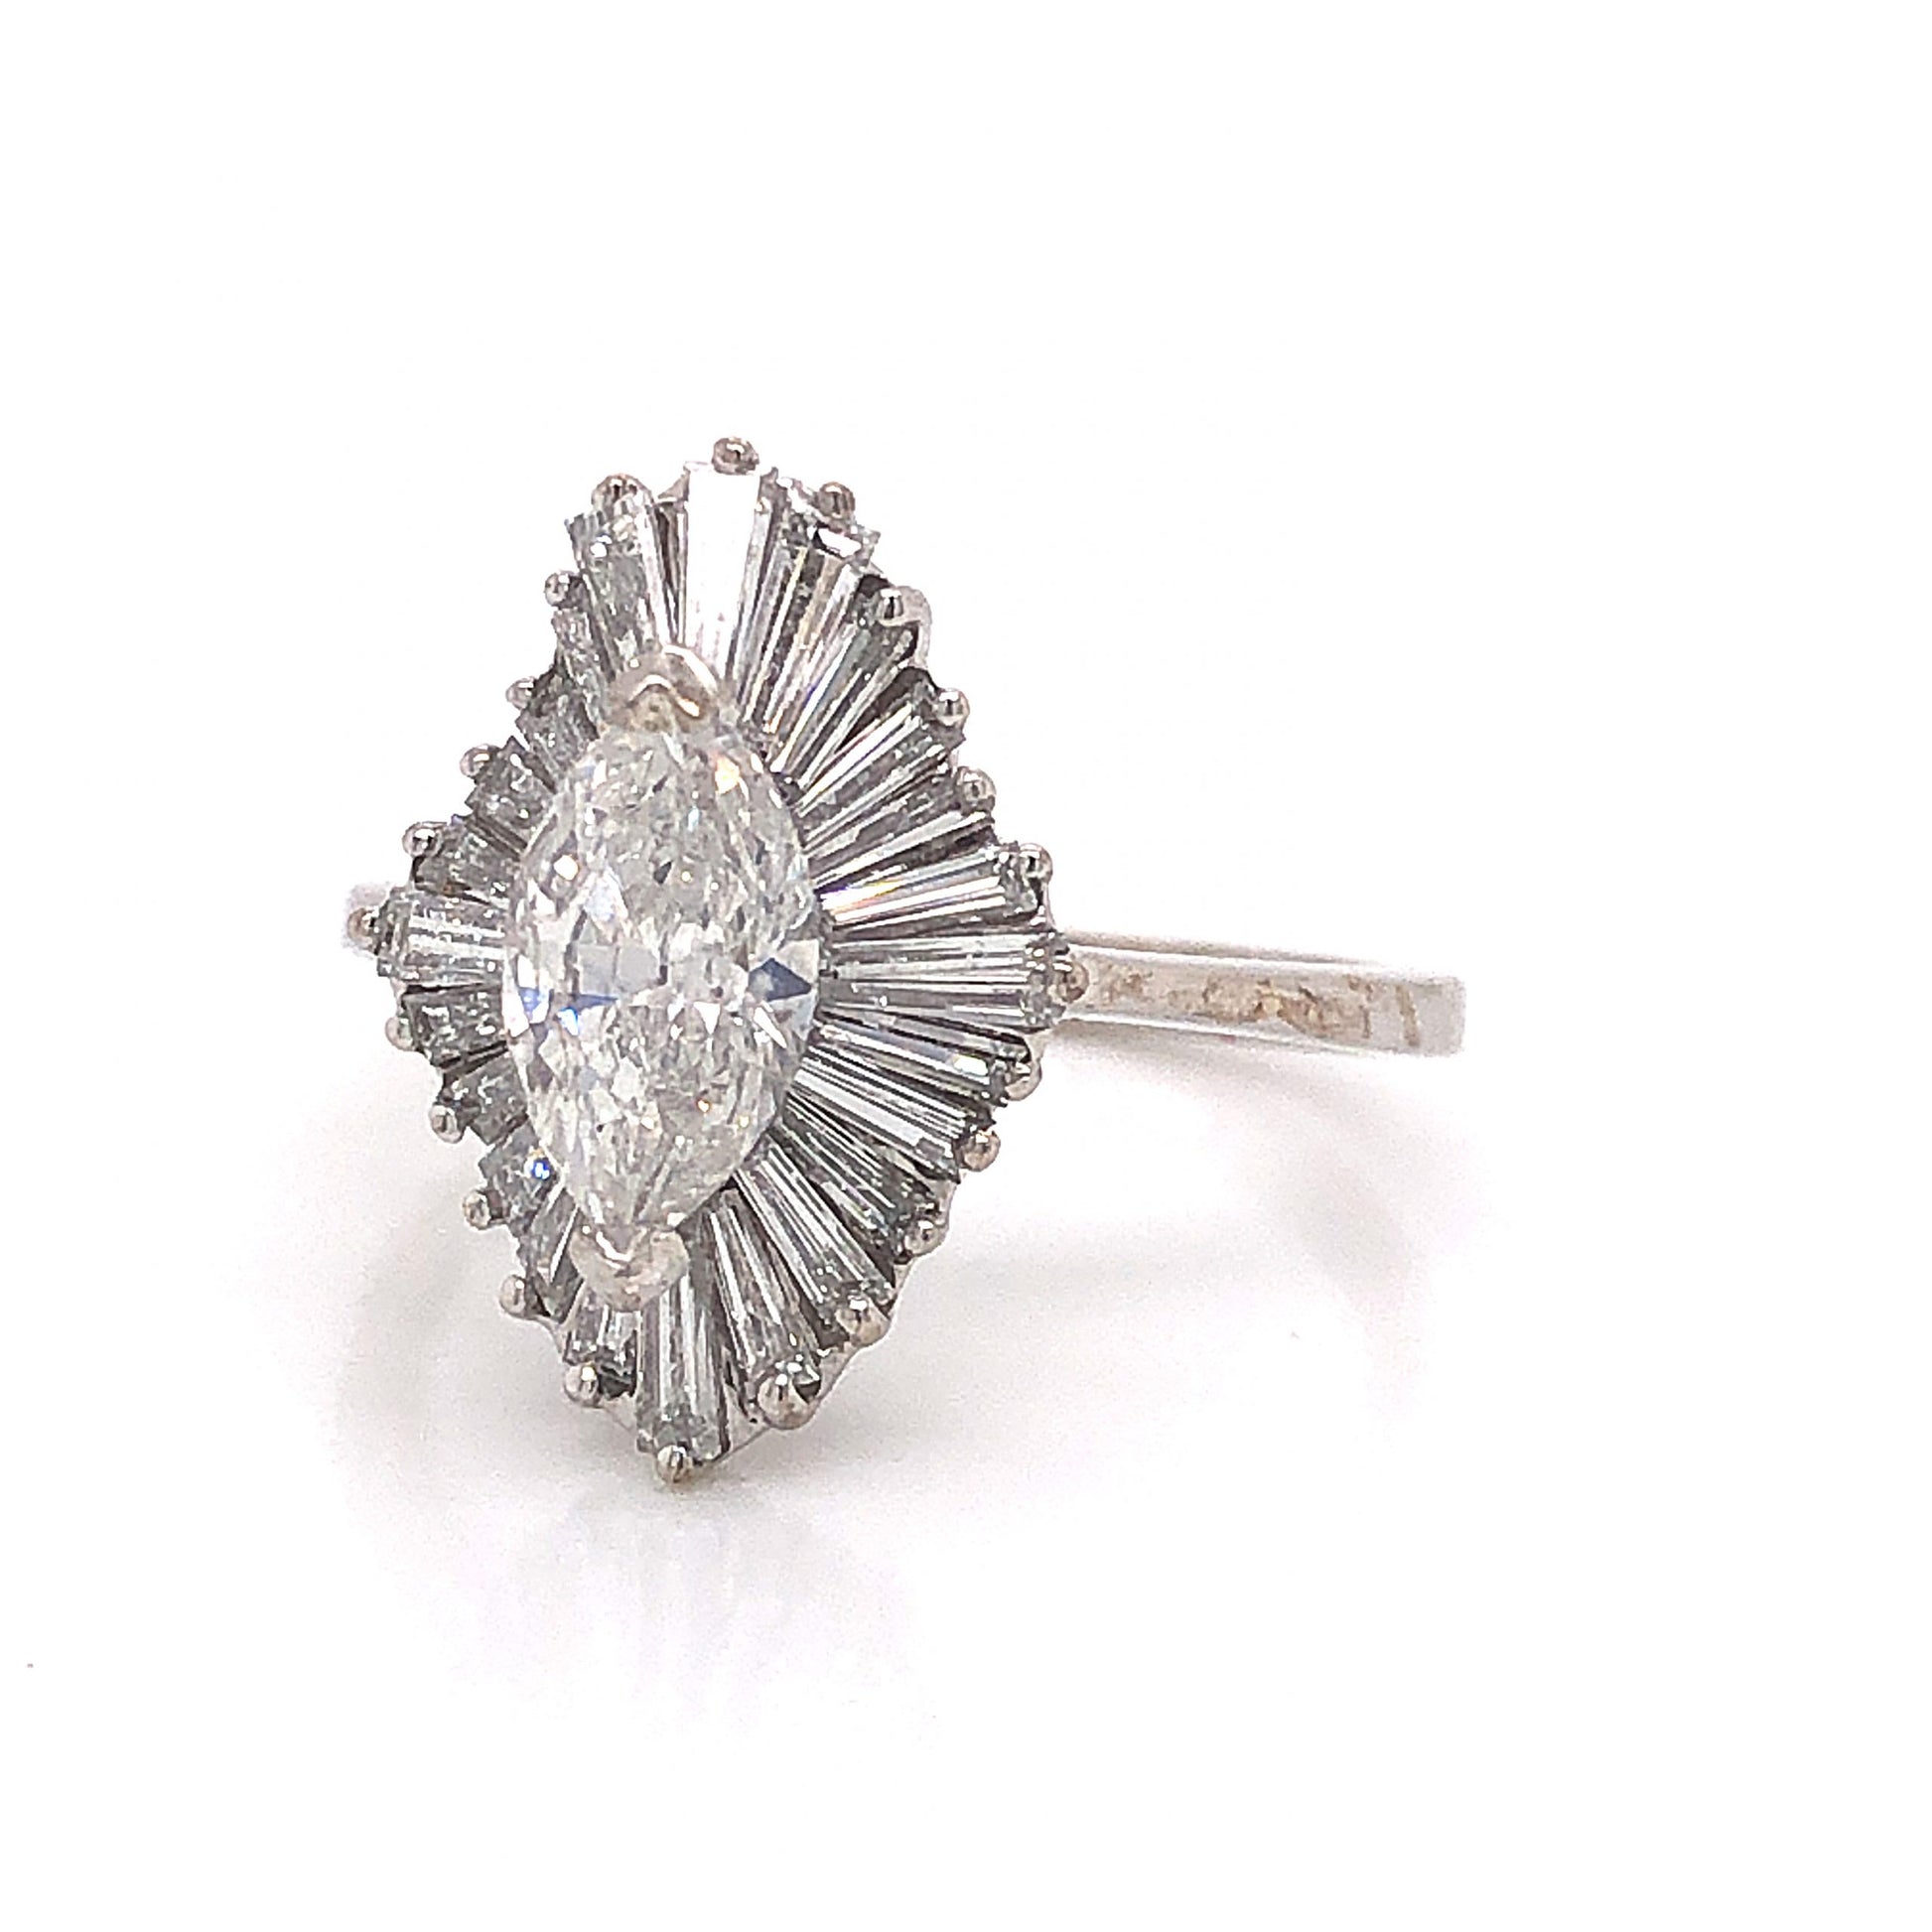 Marquise Diamond Ballerina Halo Engagement Ring in 18k White GoldComposition: 18 Karat White Gold Ring Size: 6.25 Total Diamond Weight: 1.92ct Total Gram Weight: 3.7 g Inscription: 18k
      